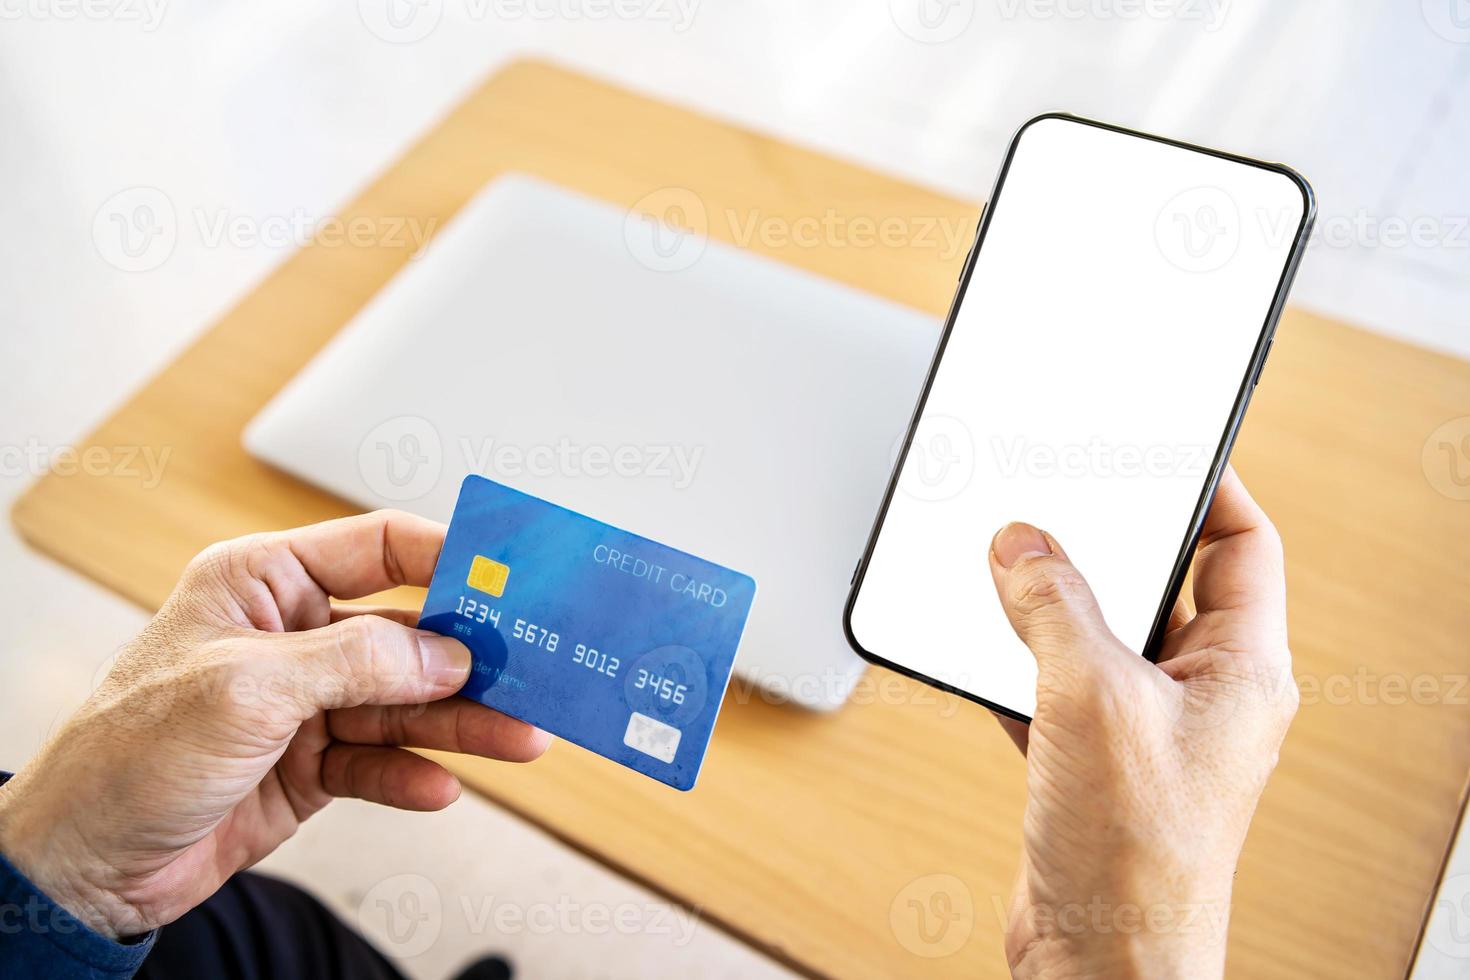 Online payment. Close Up man hands holding smartphone with blank screen and credit card, making financial transaction, smart phone for online shopping or reporting lost card photo